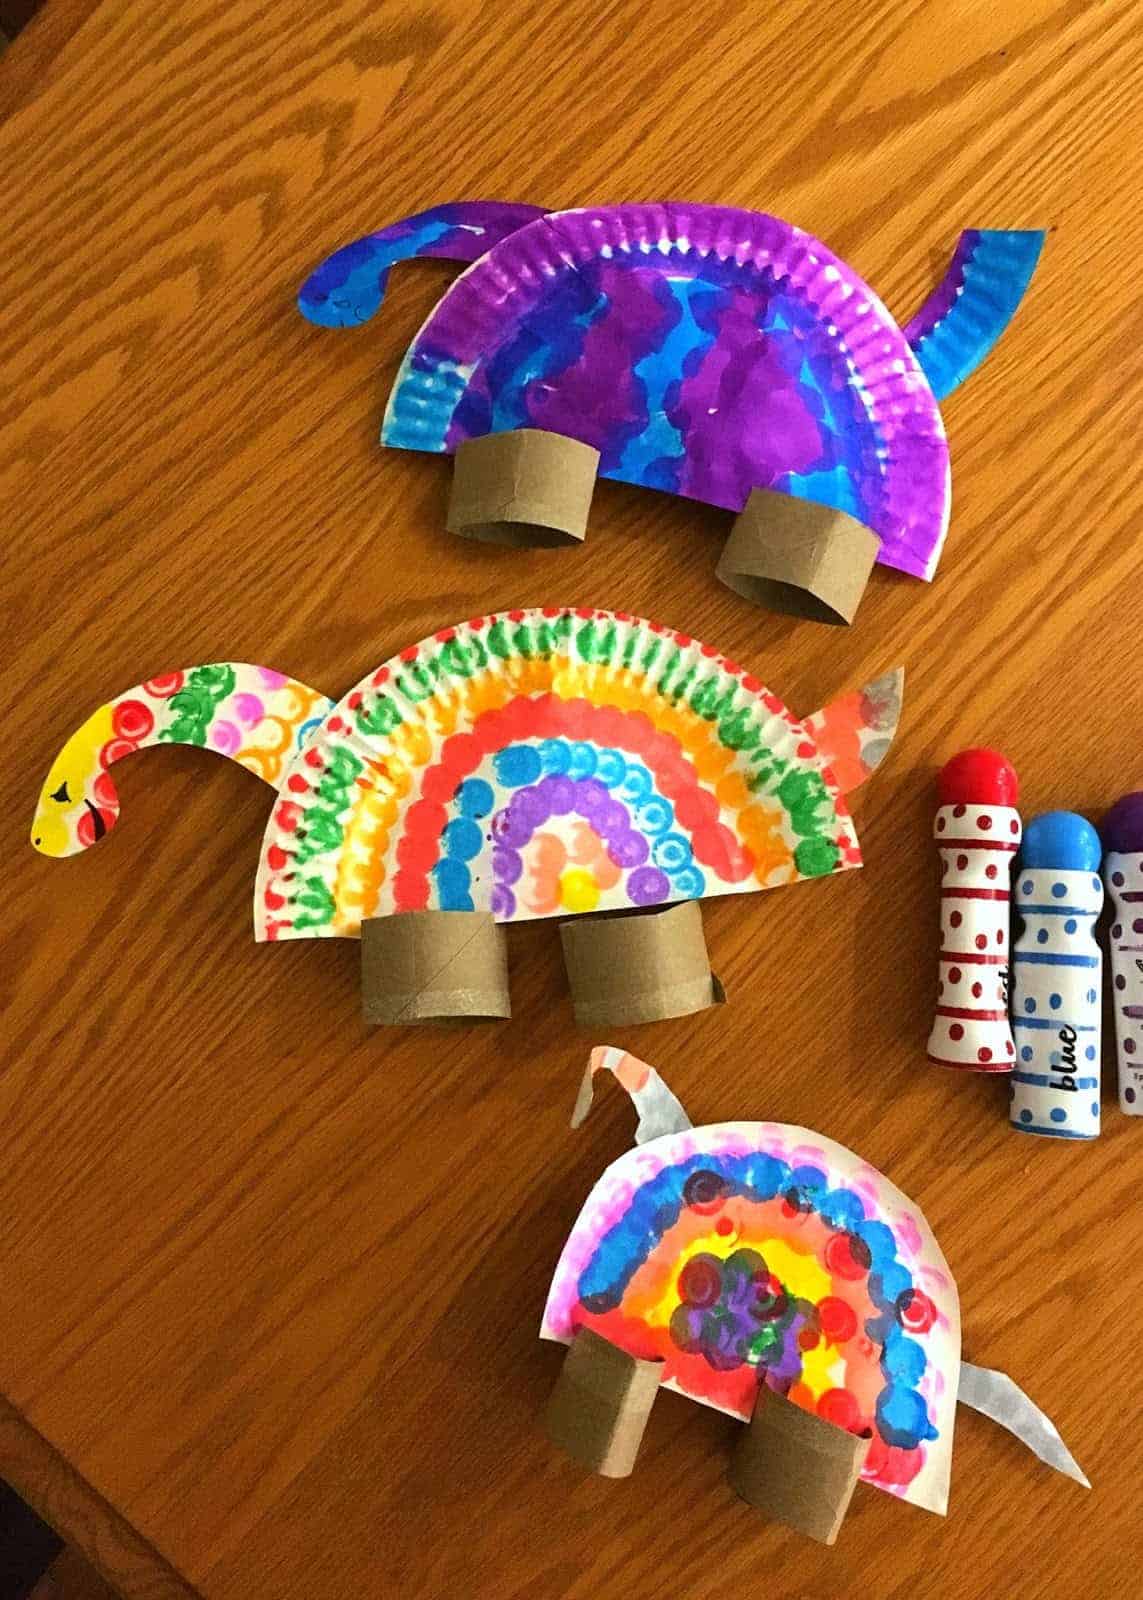 Colorful Paper Plate Dinosaur Craft Activity At Home Using Paper Towel RollPaper Plate Dinosaur Craft For Kids